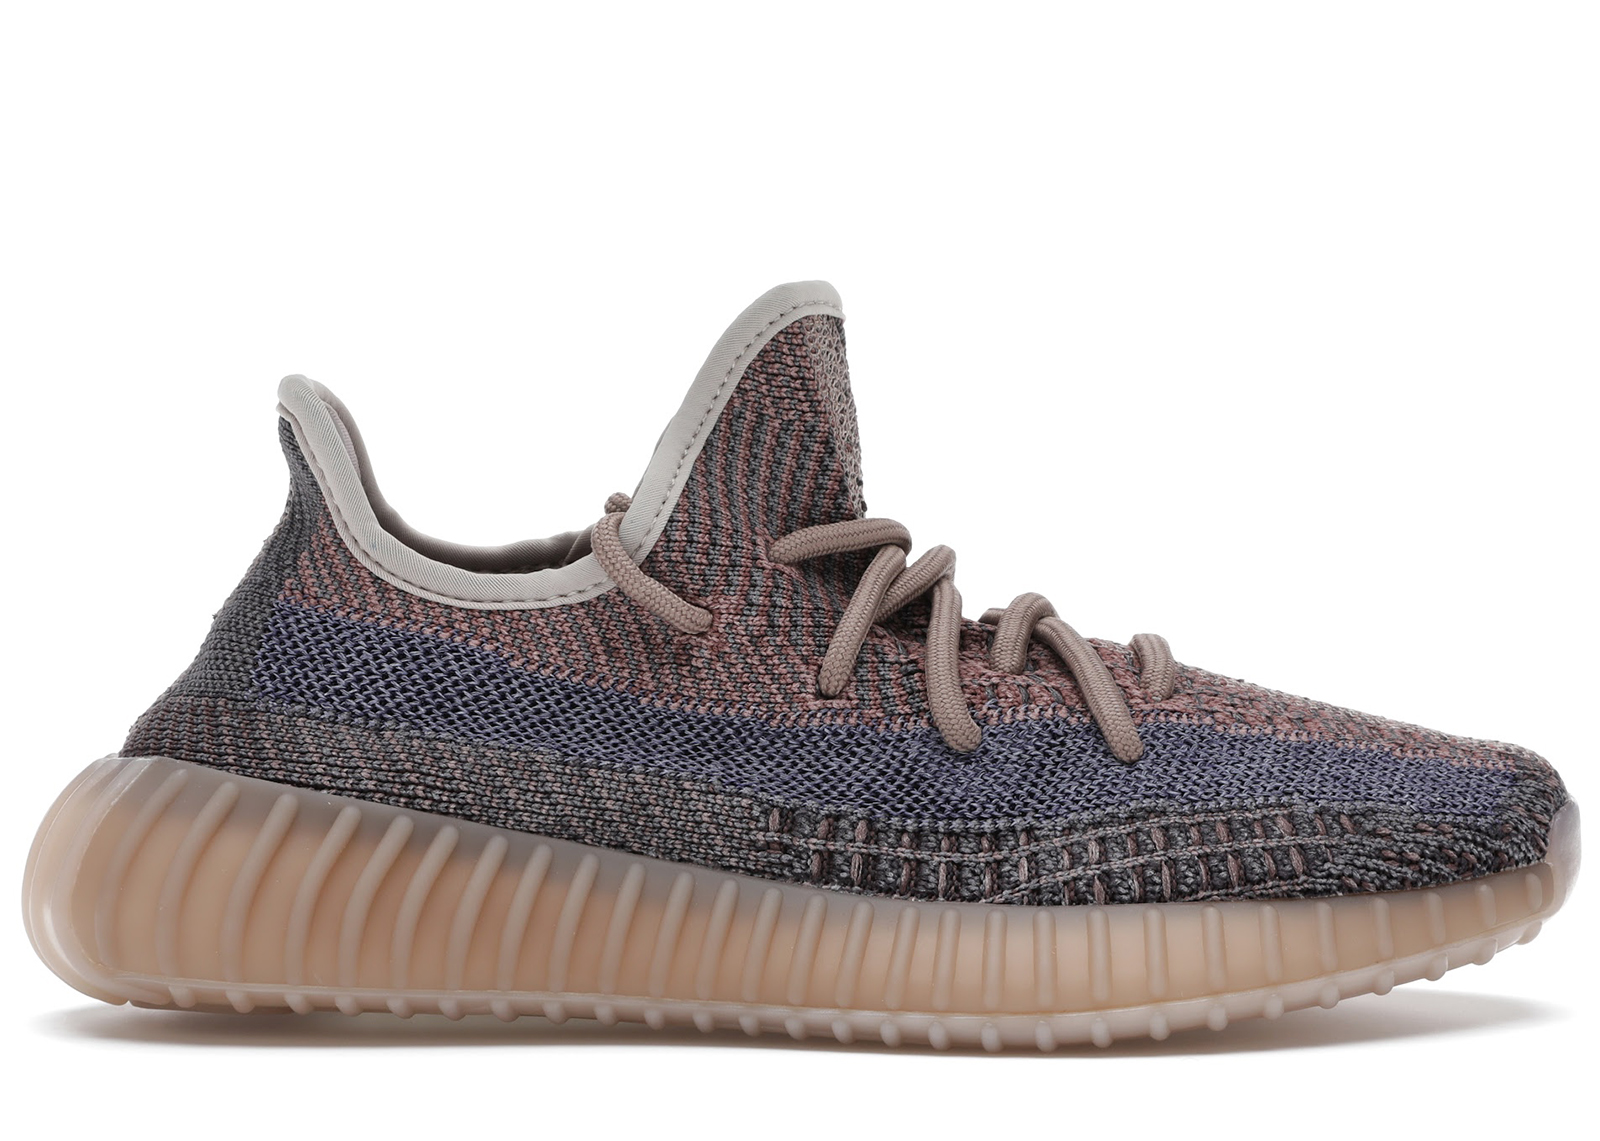 adidas Yeezy Boost 350 V2 Fade Men's - H02795 - US